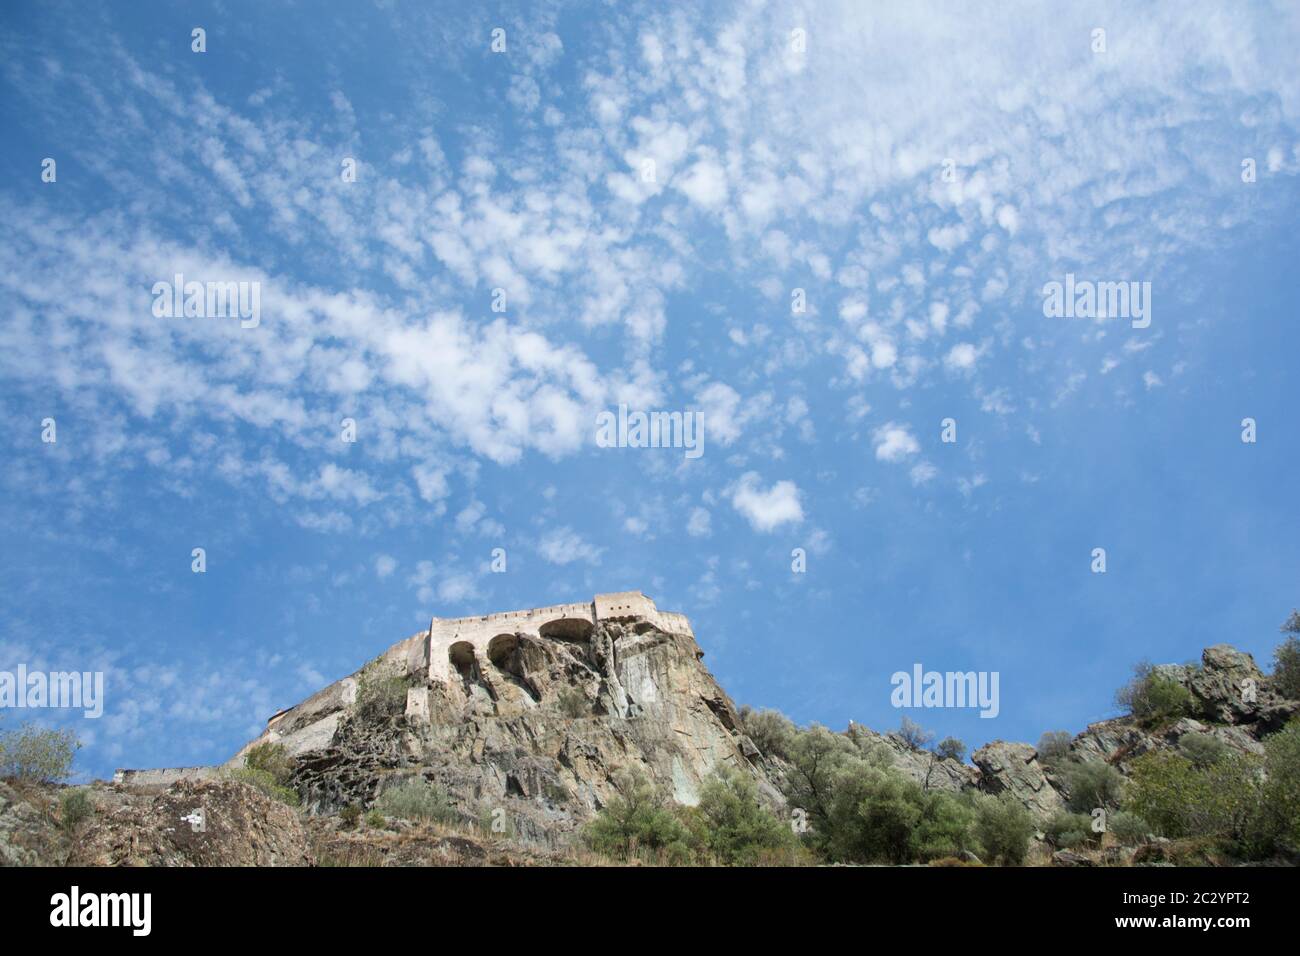 The fortress of Corte (In french:'Citadelle de Corte'), located in the fourth-largest commune in the island of Corsica, under the blue sky Stock Photo